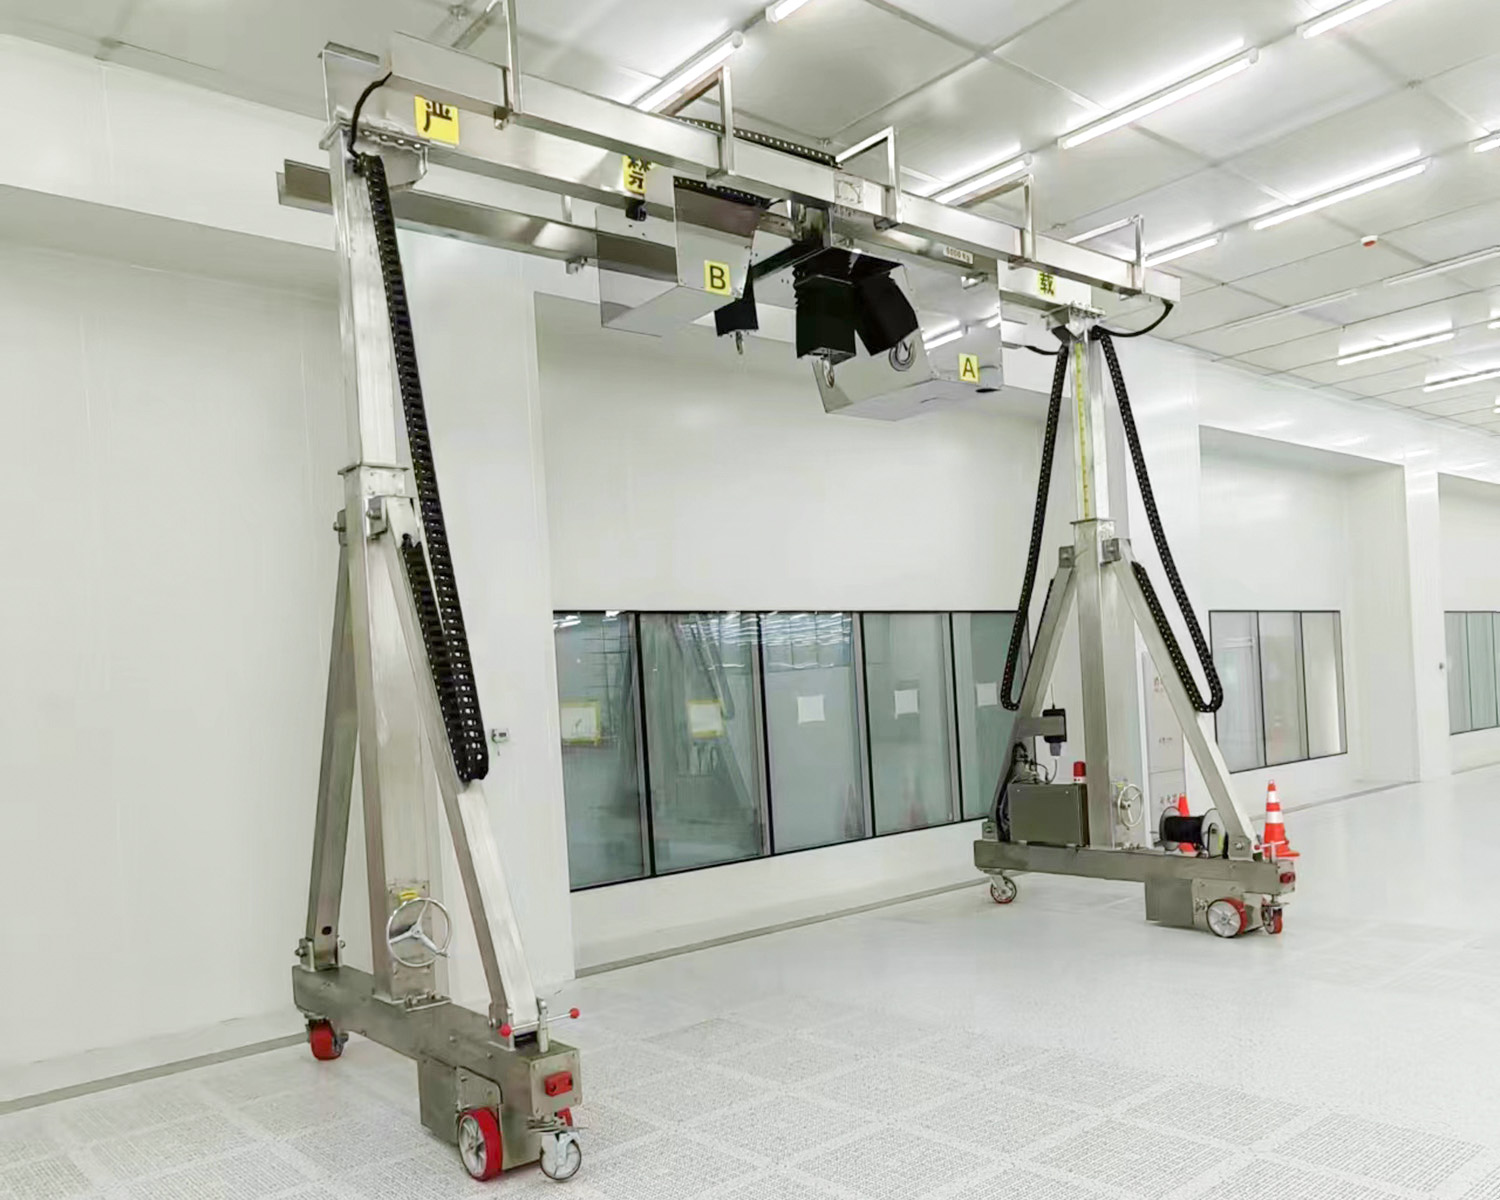 Application of Stainless Steel Crane in Cleanroom Environment